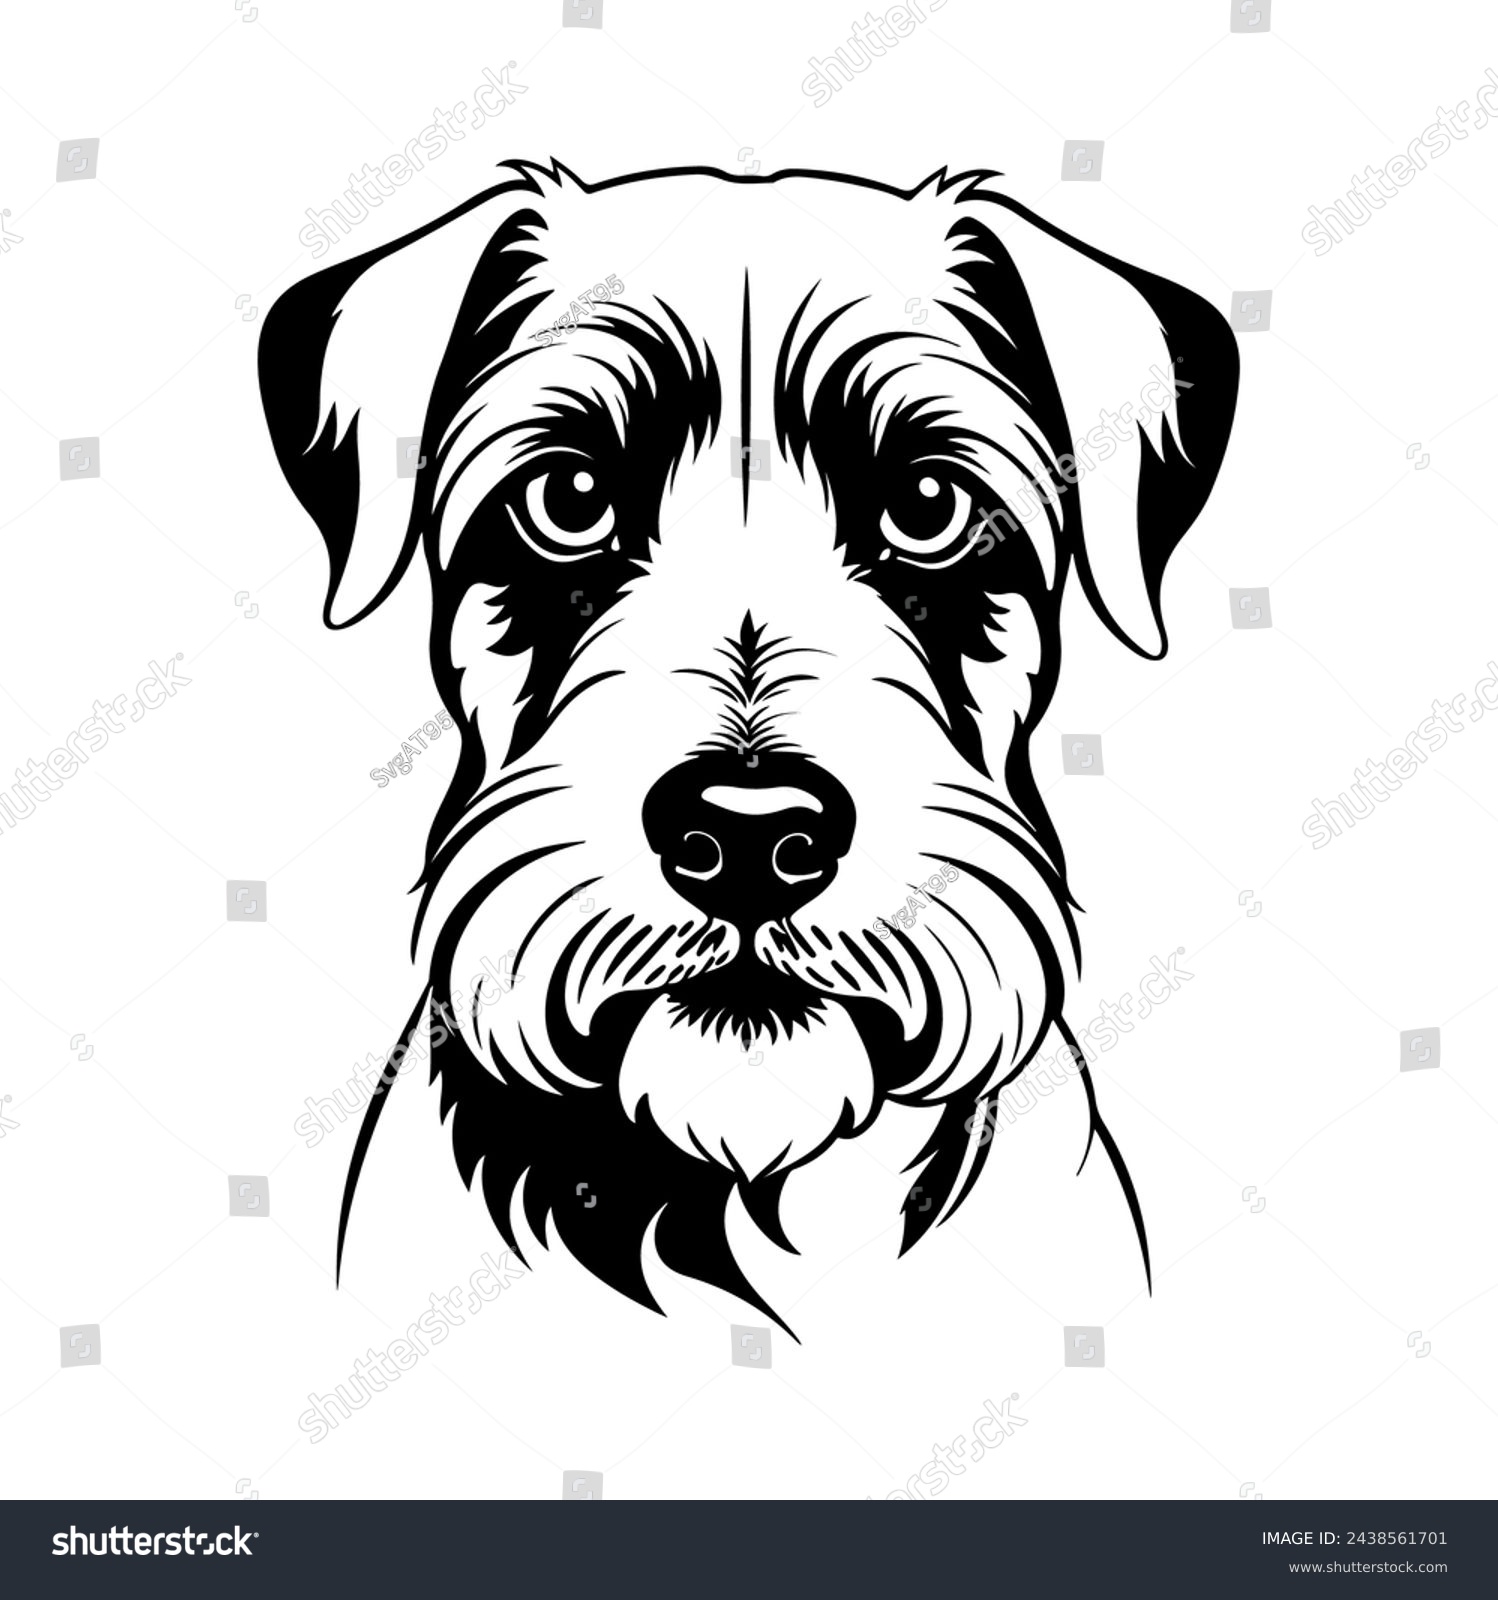 SVG of Portrait of a Sealyham Terrier Dog Vector isolated on white background, Dog Silhouettes. svg